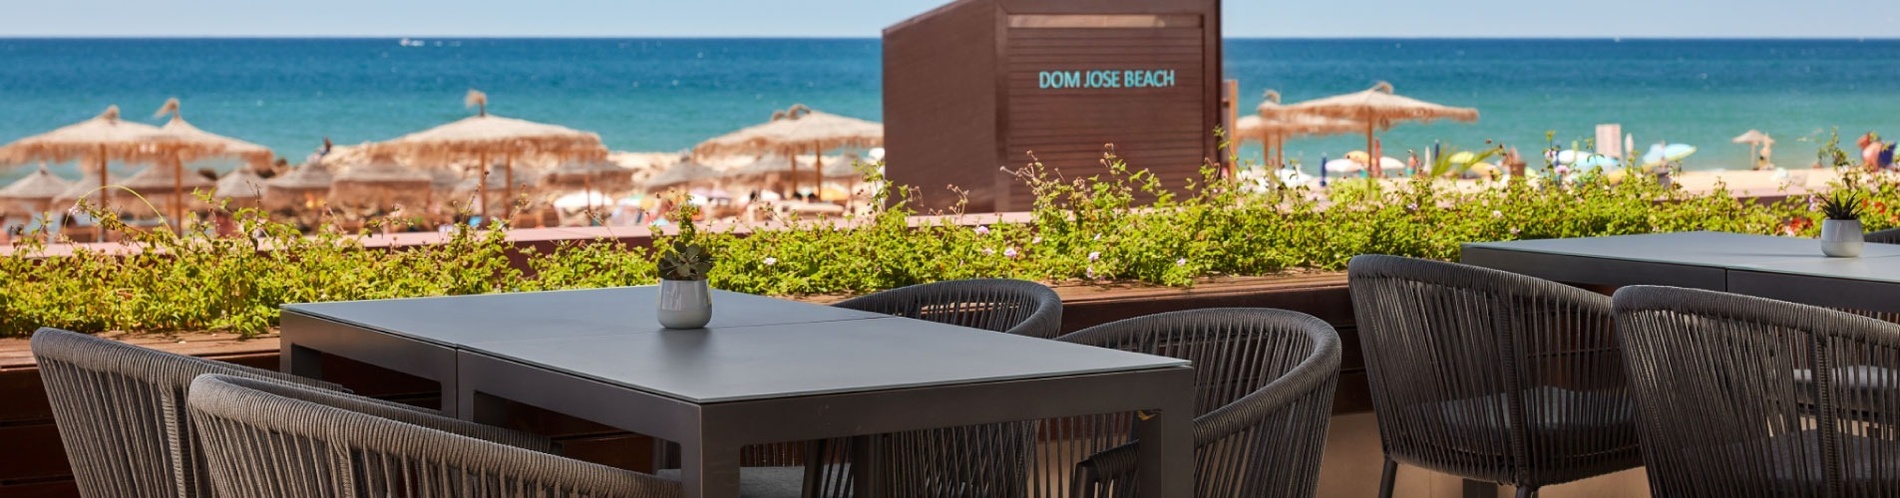 tables and chairs in front of a sign that says dom jose beach